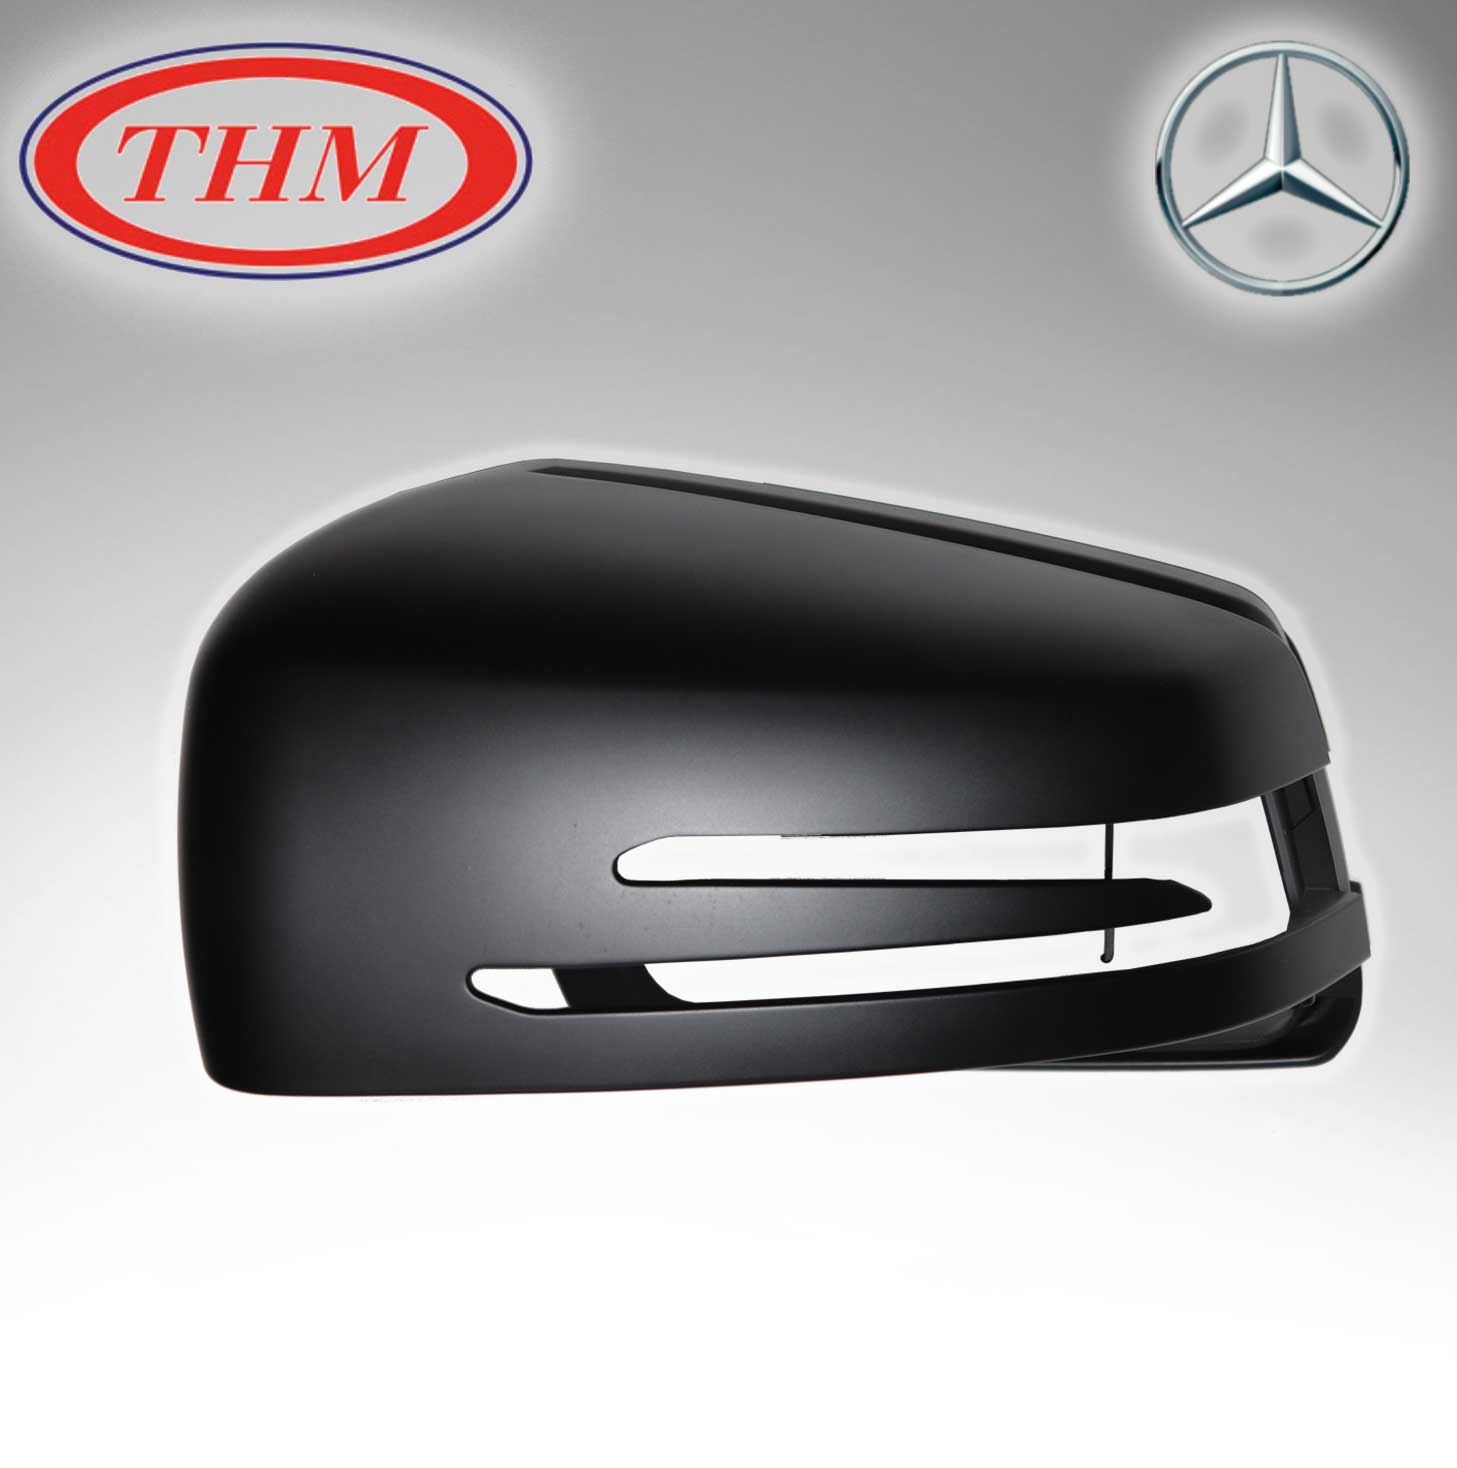 THM TH-7221HSL (Taiwan) MIRROR COVER ONLY LH For MERCEDES BENZ W221 2128100164 (2128100964, 2128101164)